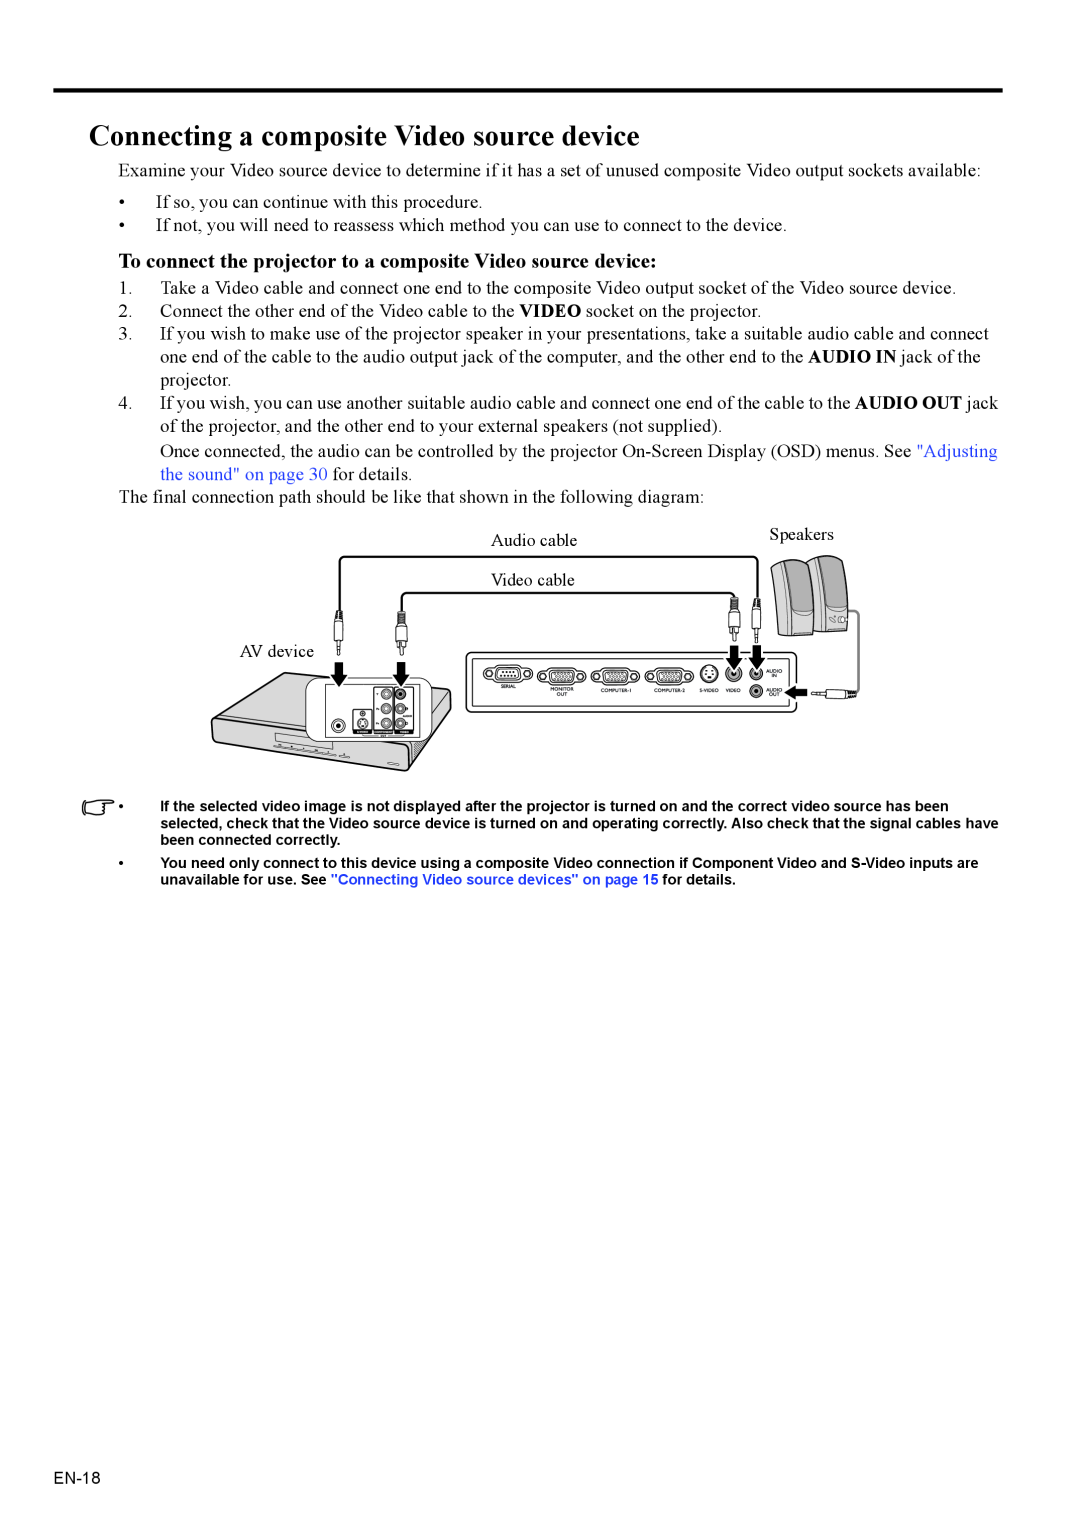 Mitsubishi Electronics EX200U user manual Connecting a composite Video source device, the sound on page 30 for details 